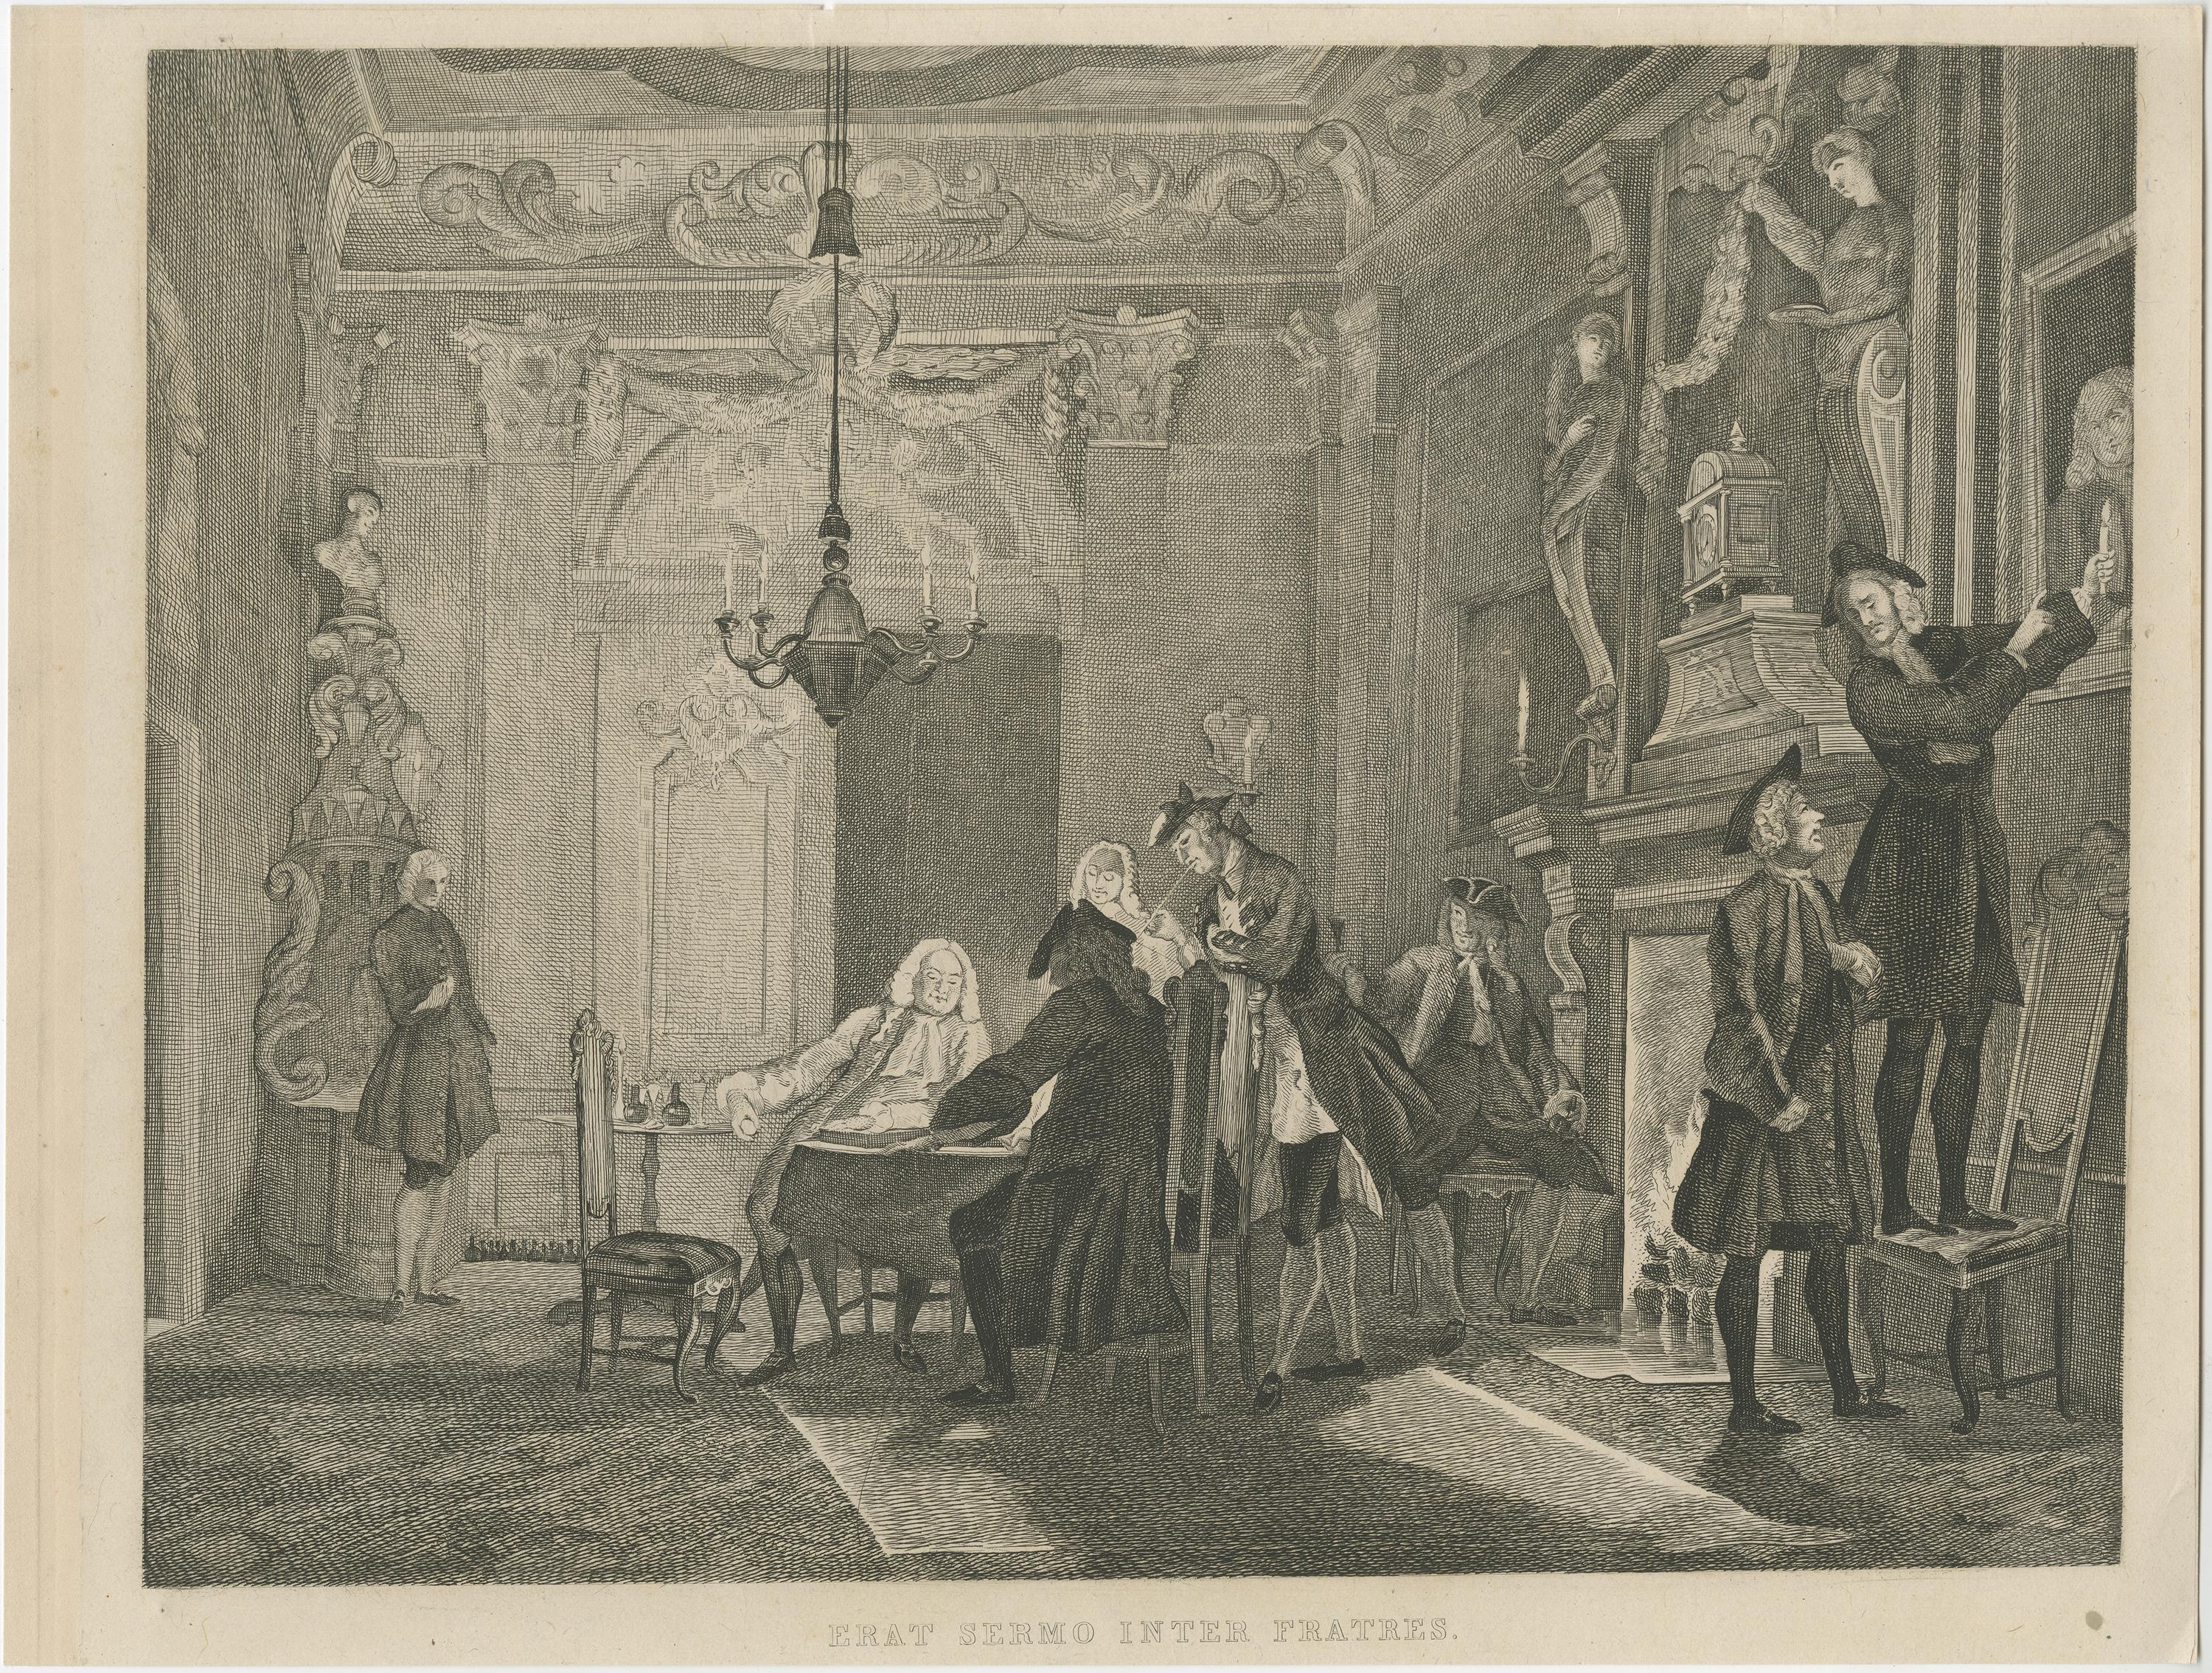 Antique print titled 'Erat Sermo Inter Fratres'. 

Etching on chine collé after the painting by Cornelis Troost. It shows a Dutch interior with a group of Dutch friends gathered in the house of Biberius by night; some men seated around a table and